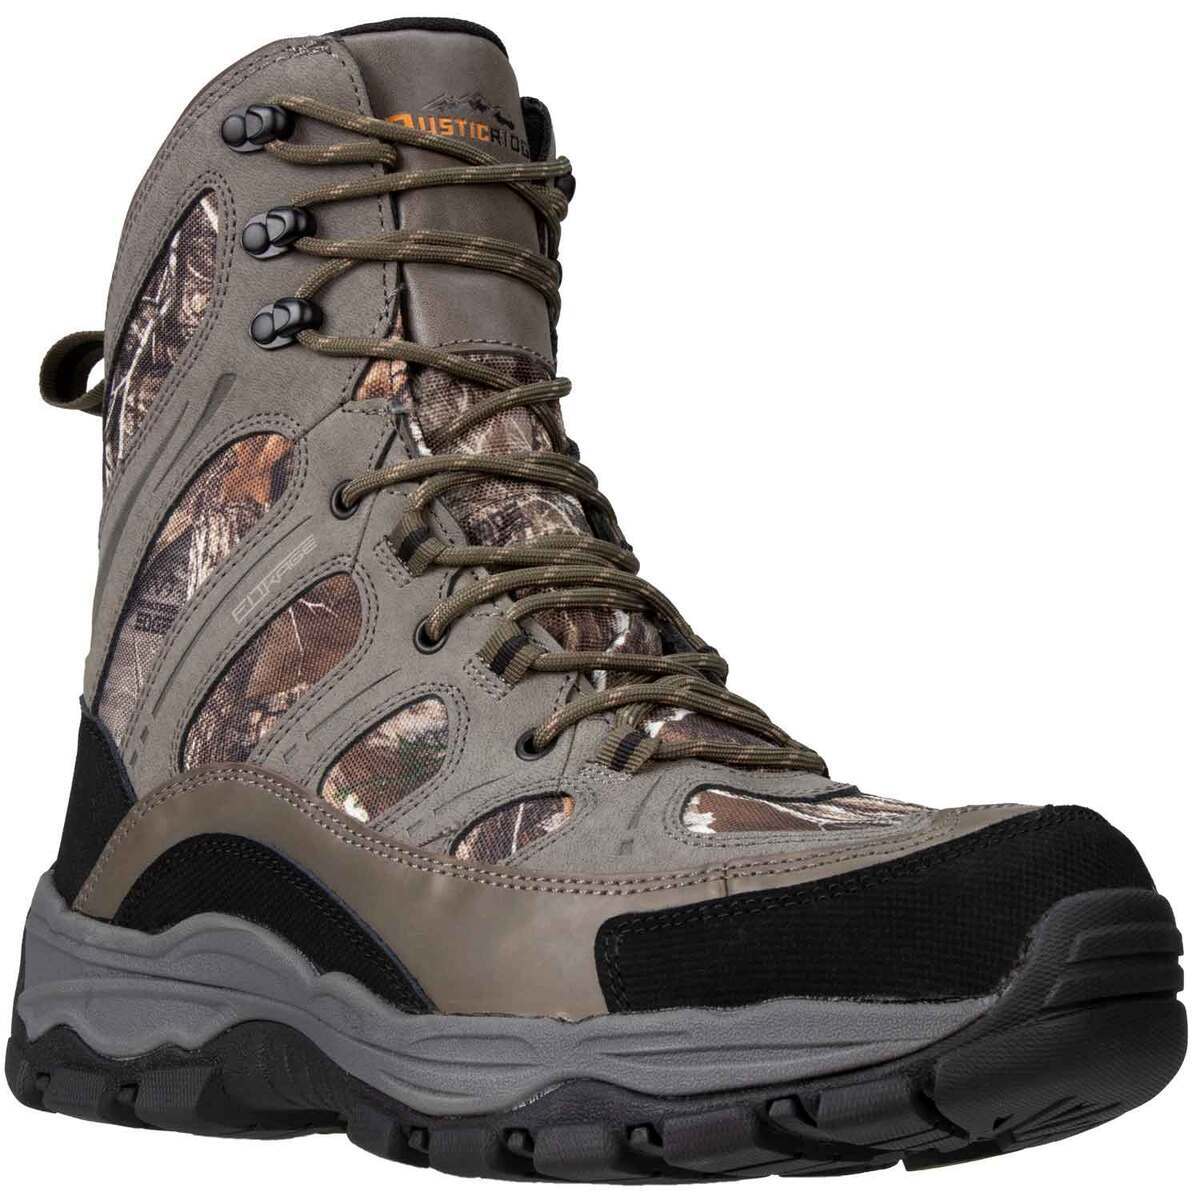 Han fraktion Betsy Trotwood Rustic Ridge Men's 13in 400g Insulated Waterproof Hunting Boots |  Sportsman's Warehouse